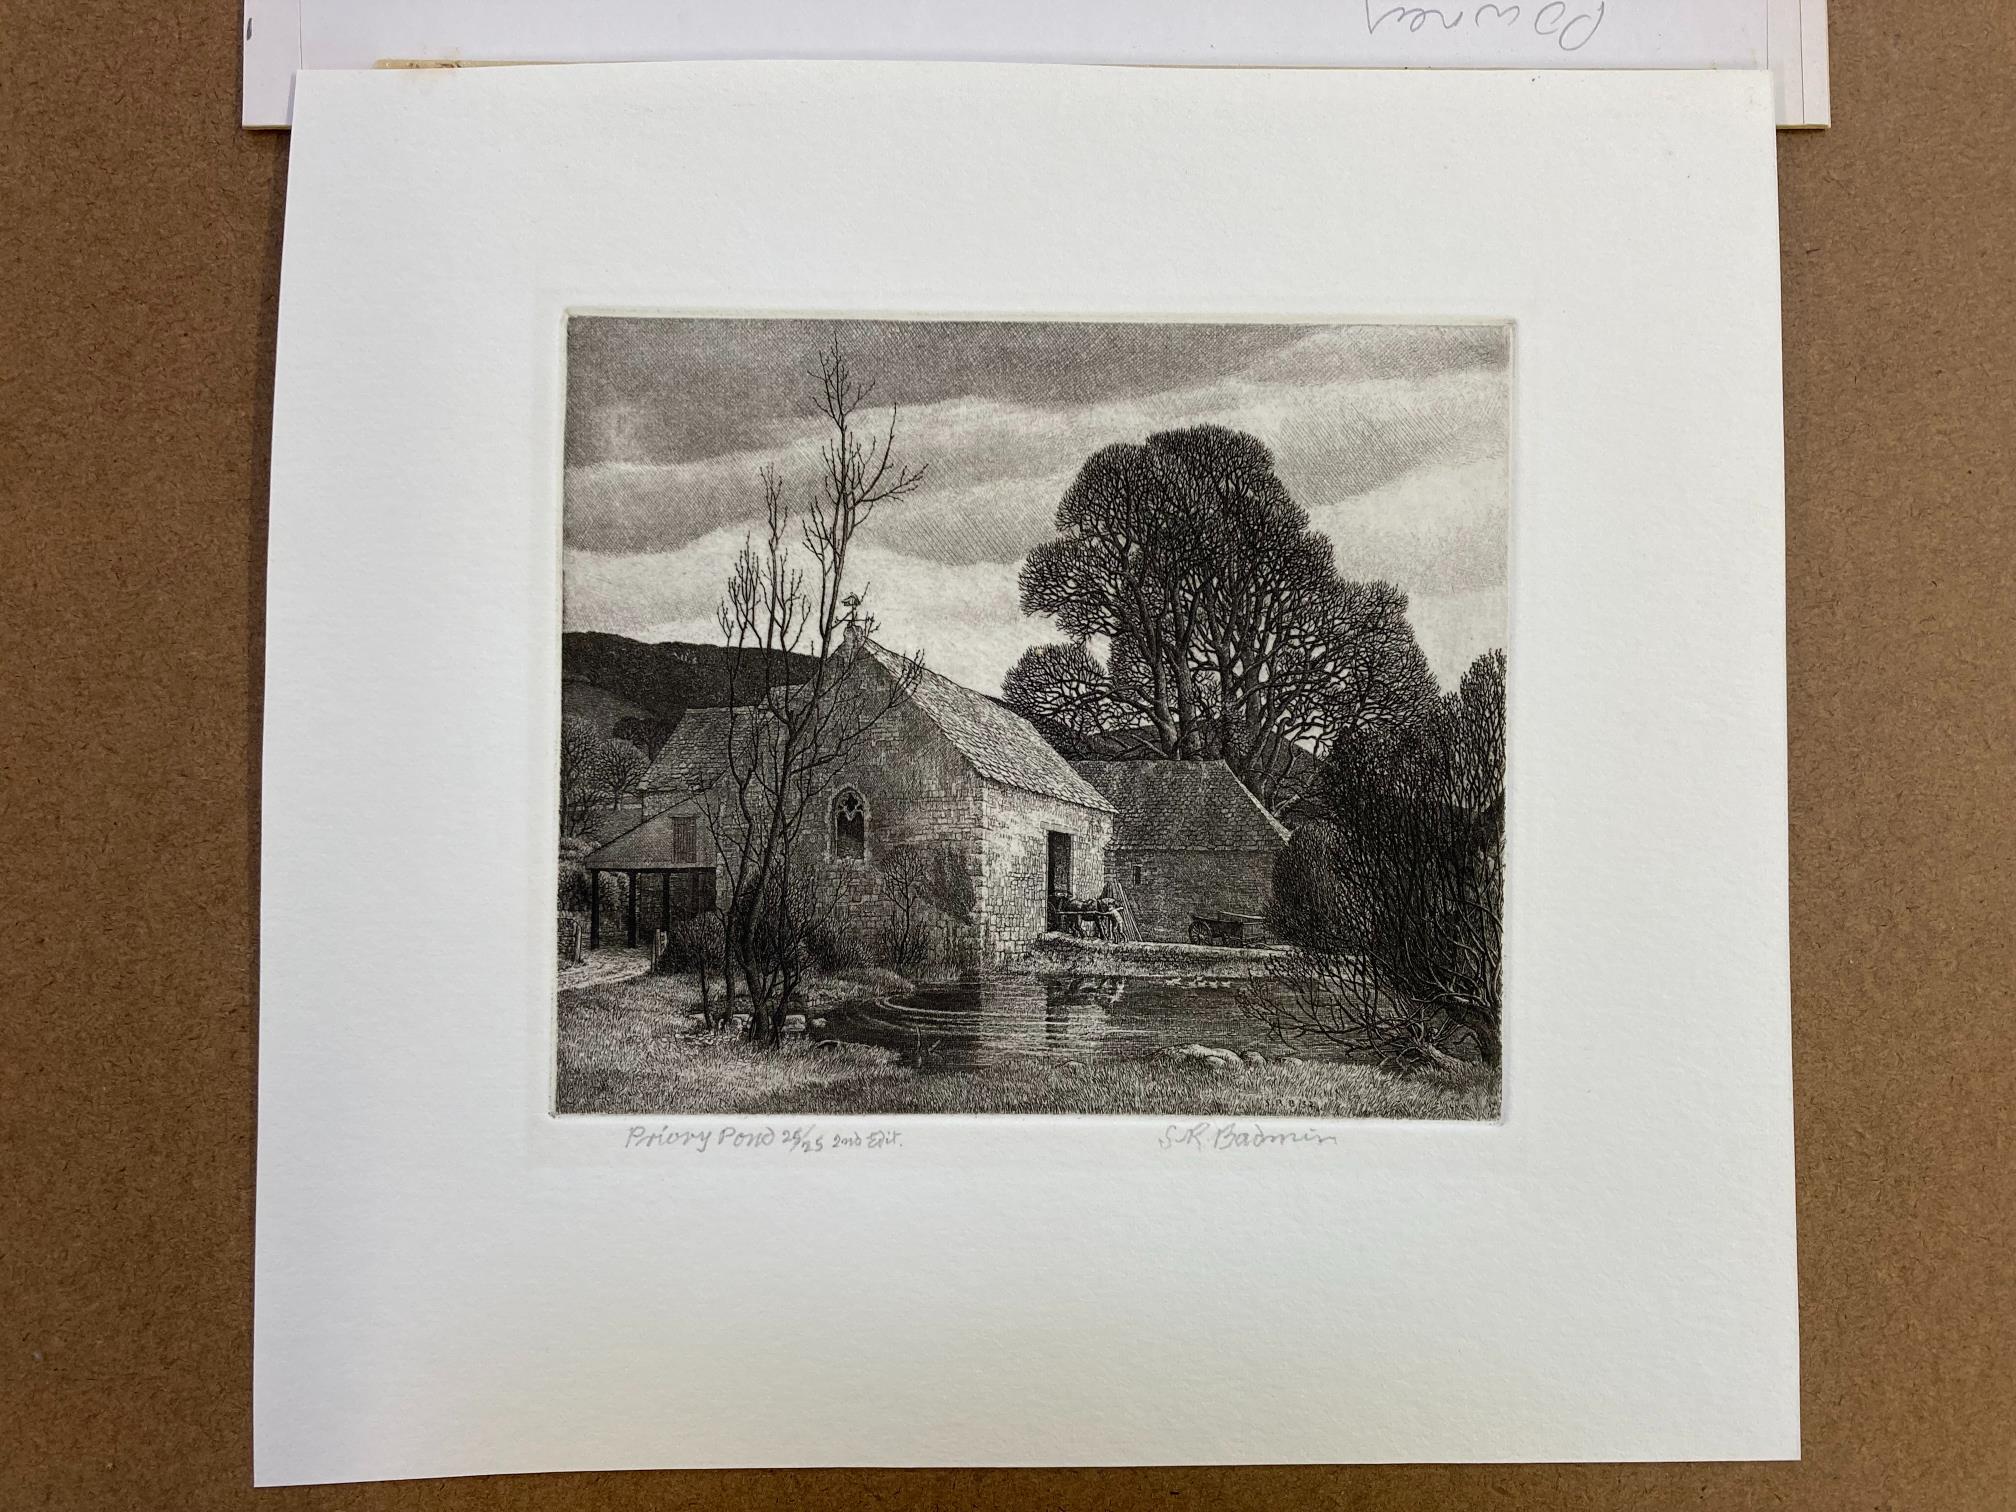 Badmin (Stanley Roy, 1906-1989). Priory Pond, 1932, etching - Image 2 of 2